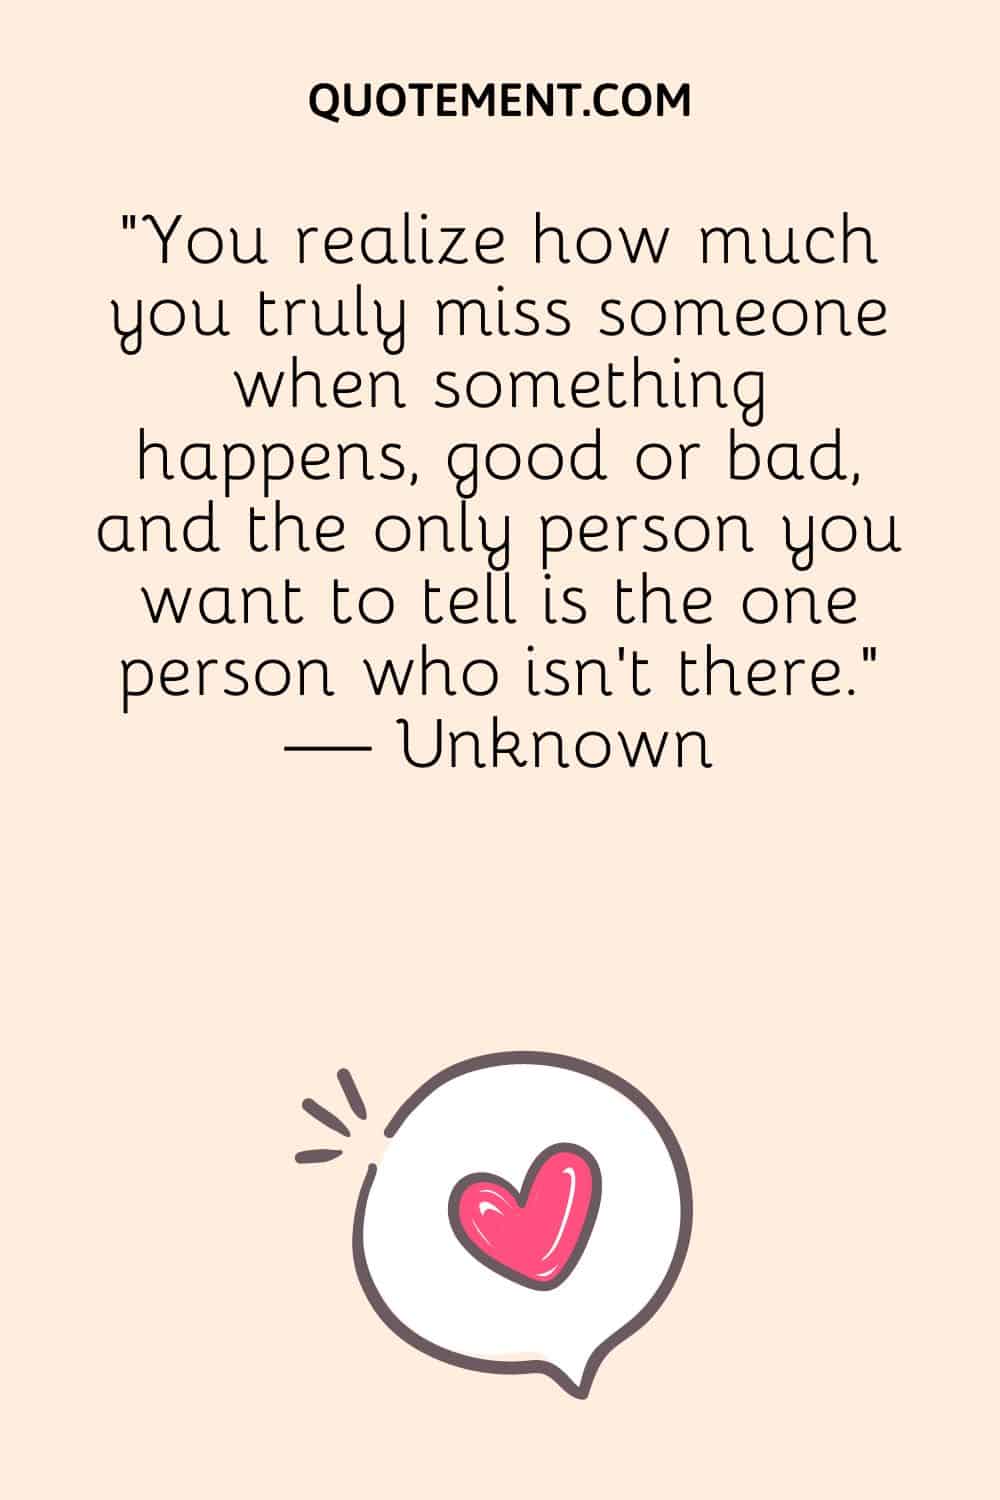 You realize how much you truly miss someone when something happens, good or bad, and the only person you want to tell is the one person who isn’t there.